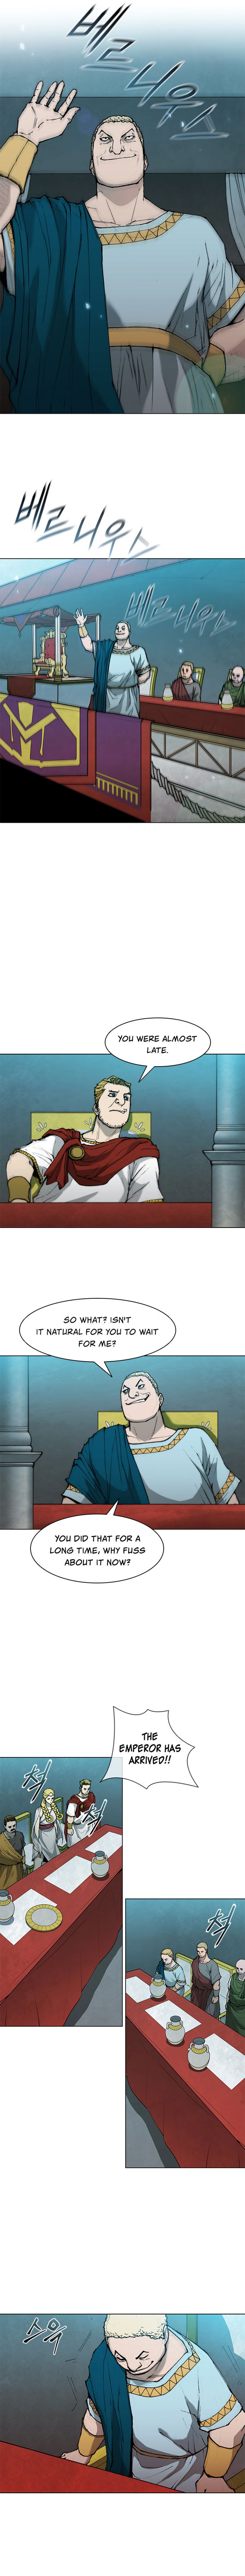 long-way-of-the-warrior-chap-36-1